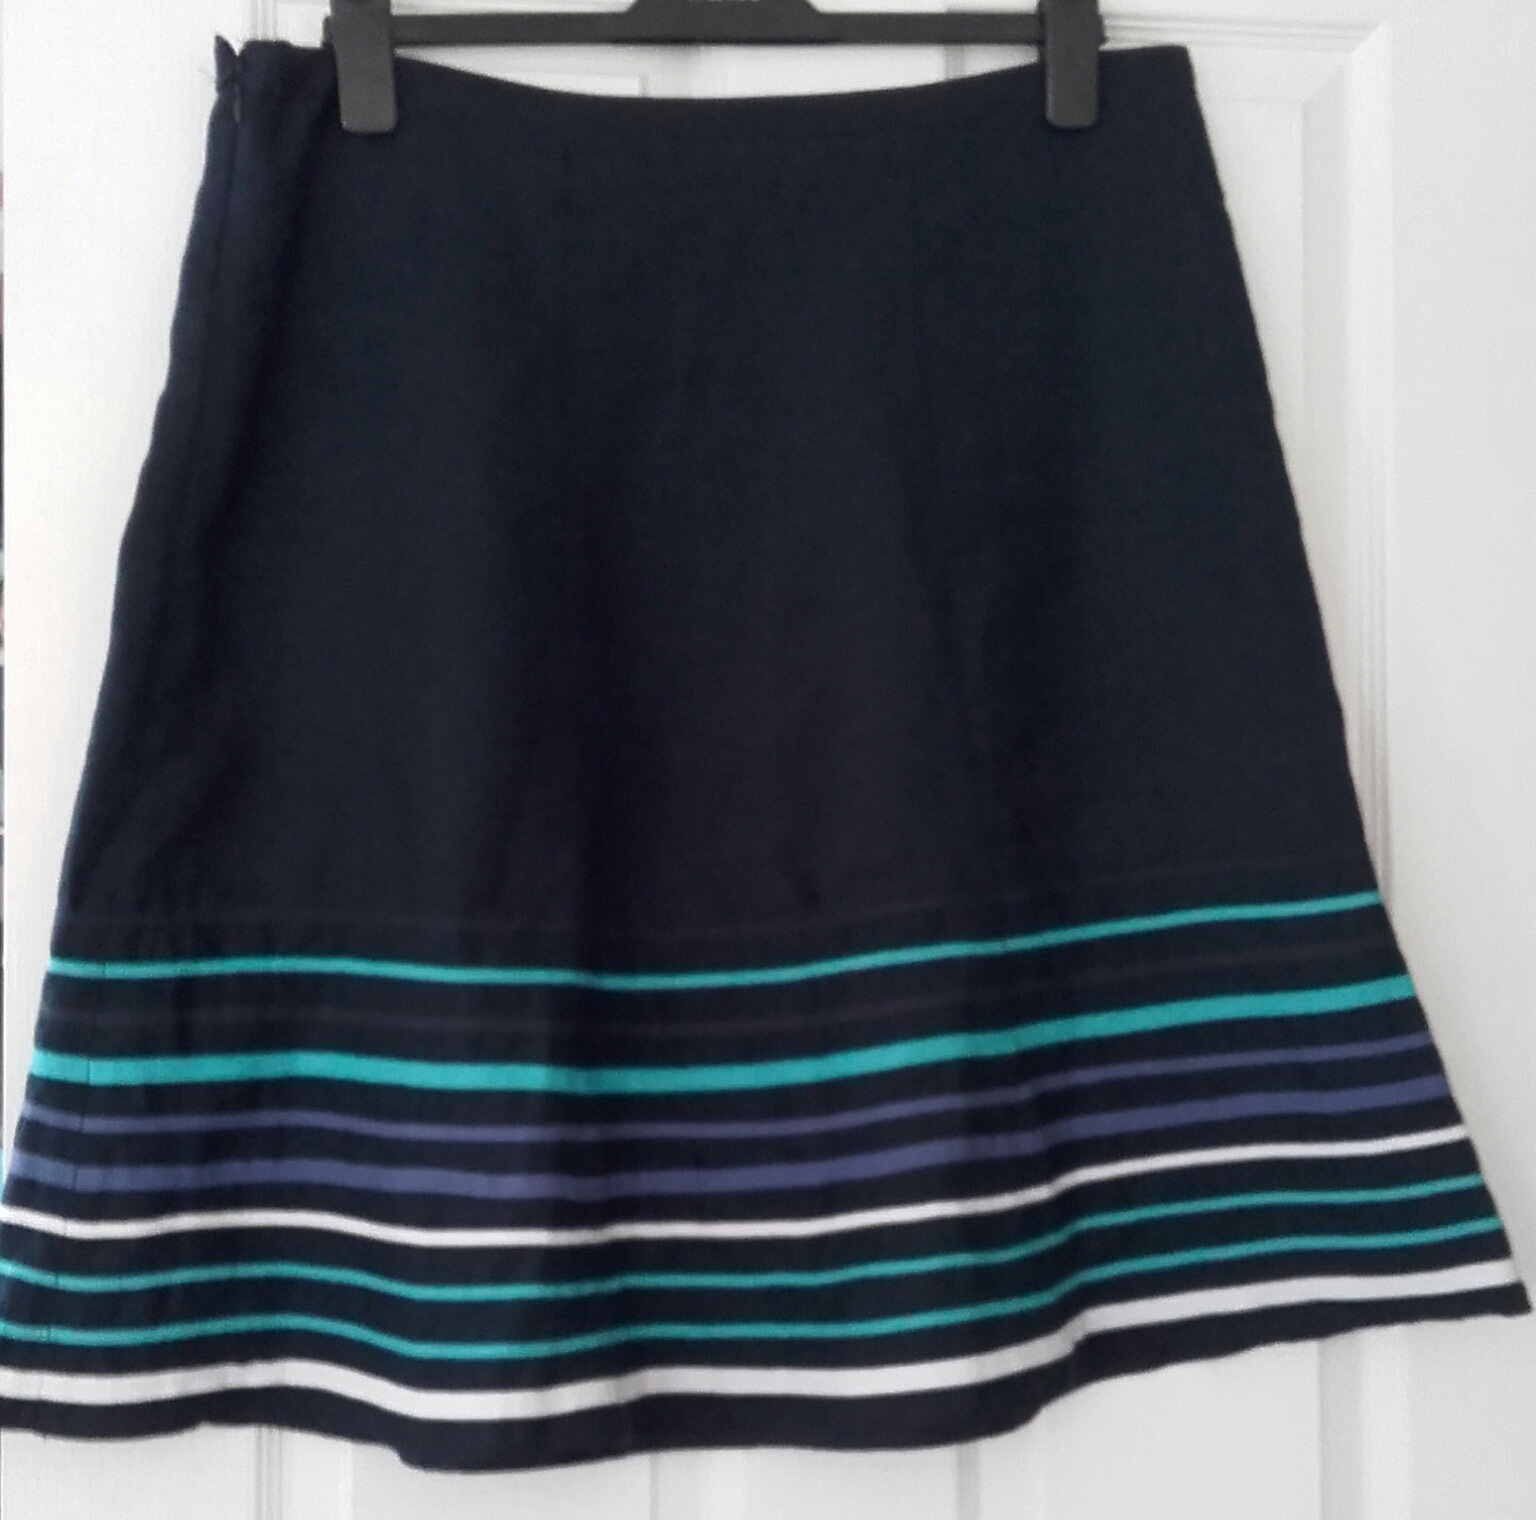 Refashion Co-op: Skirt made bigger and shorter